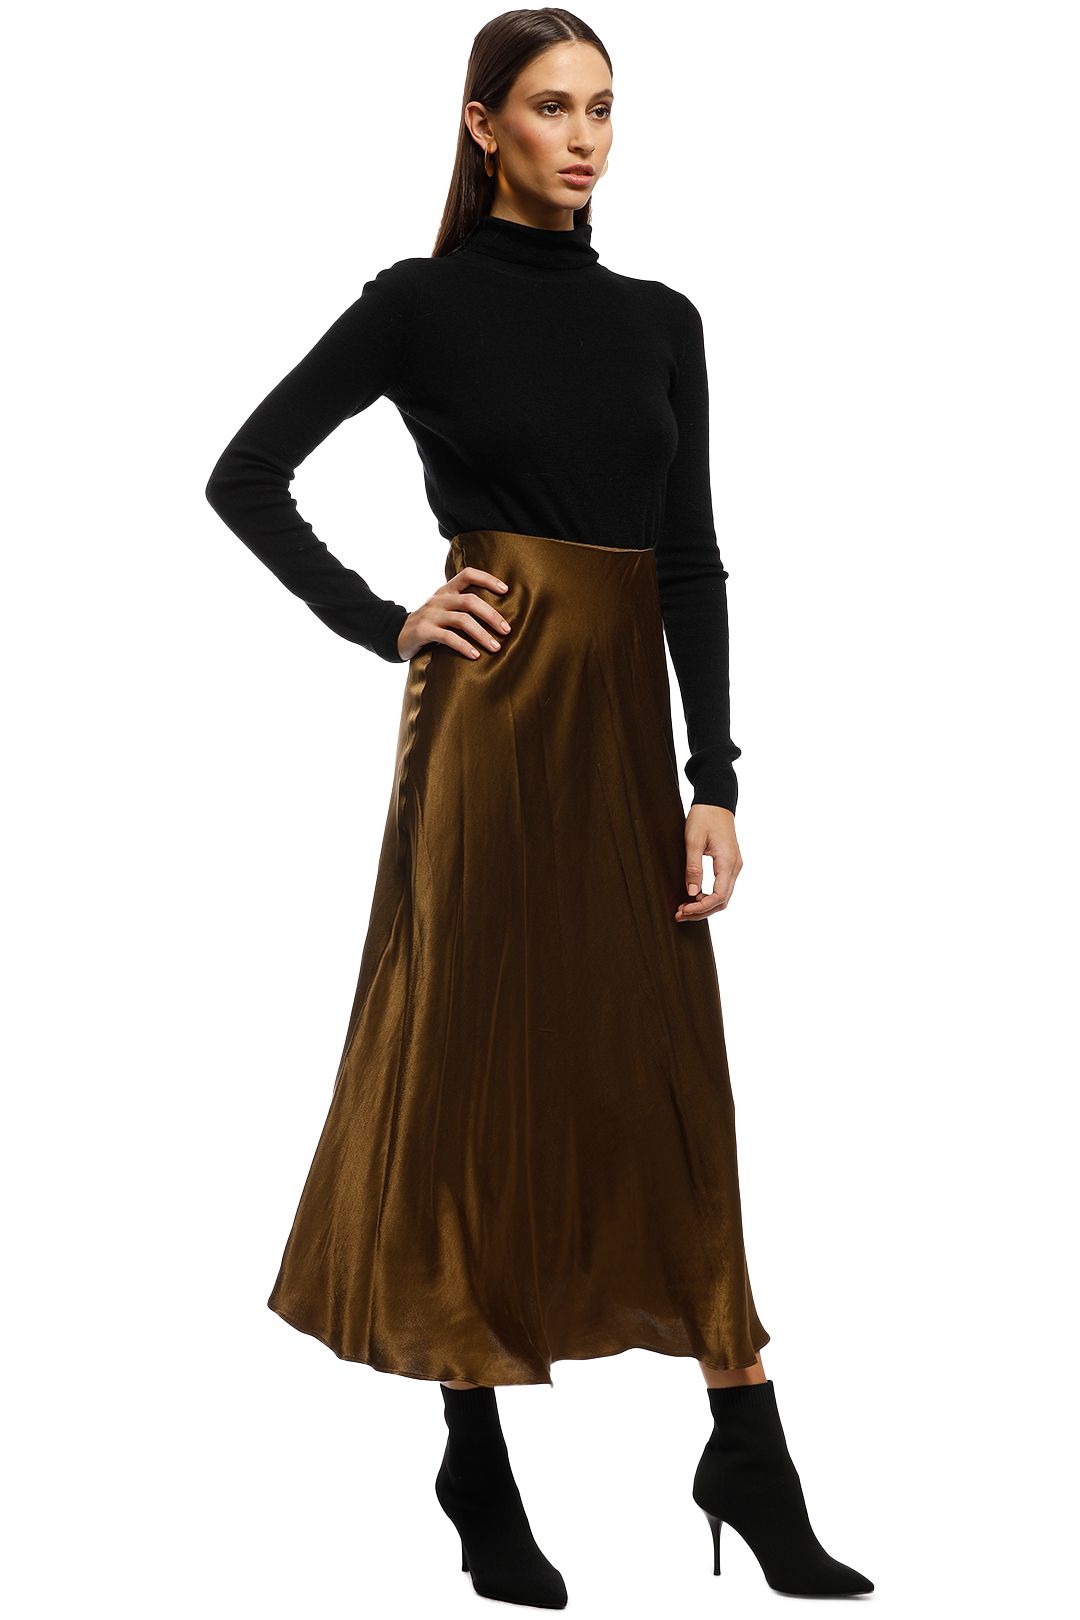 AKIN by Ginger & Smart - Grove Skirt - Brown - Side